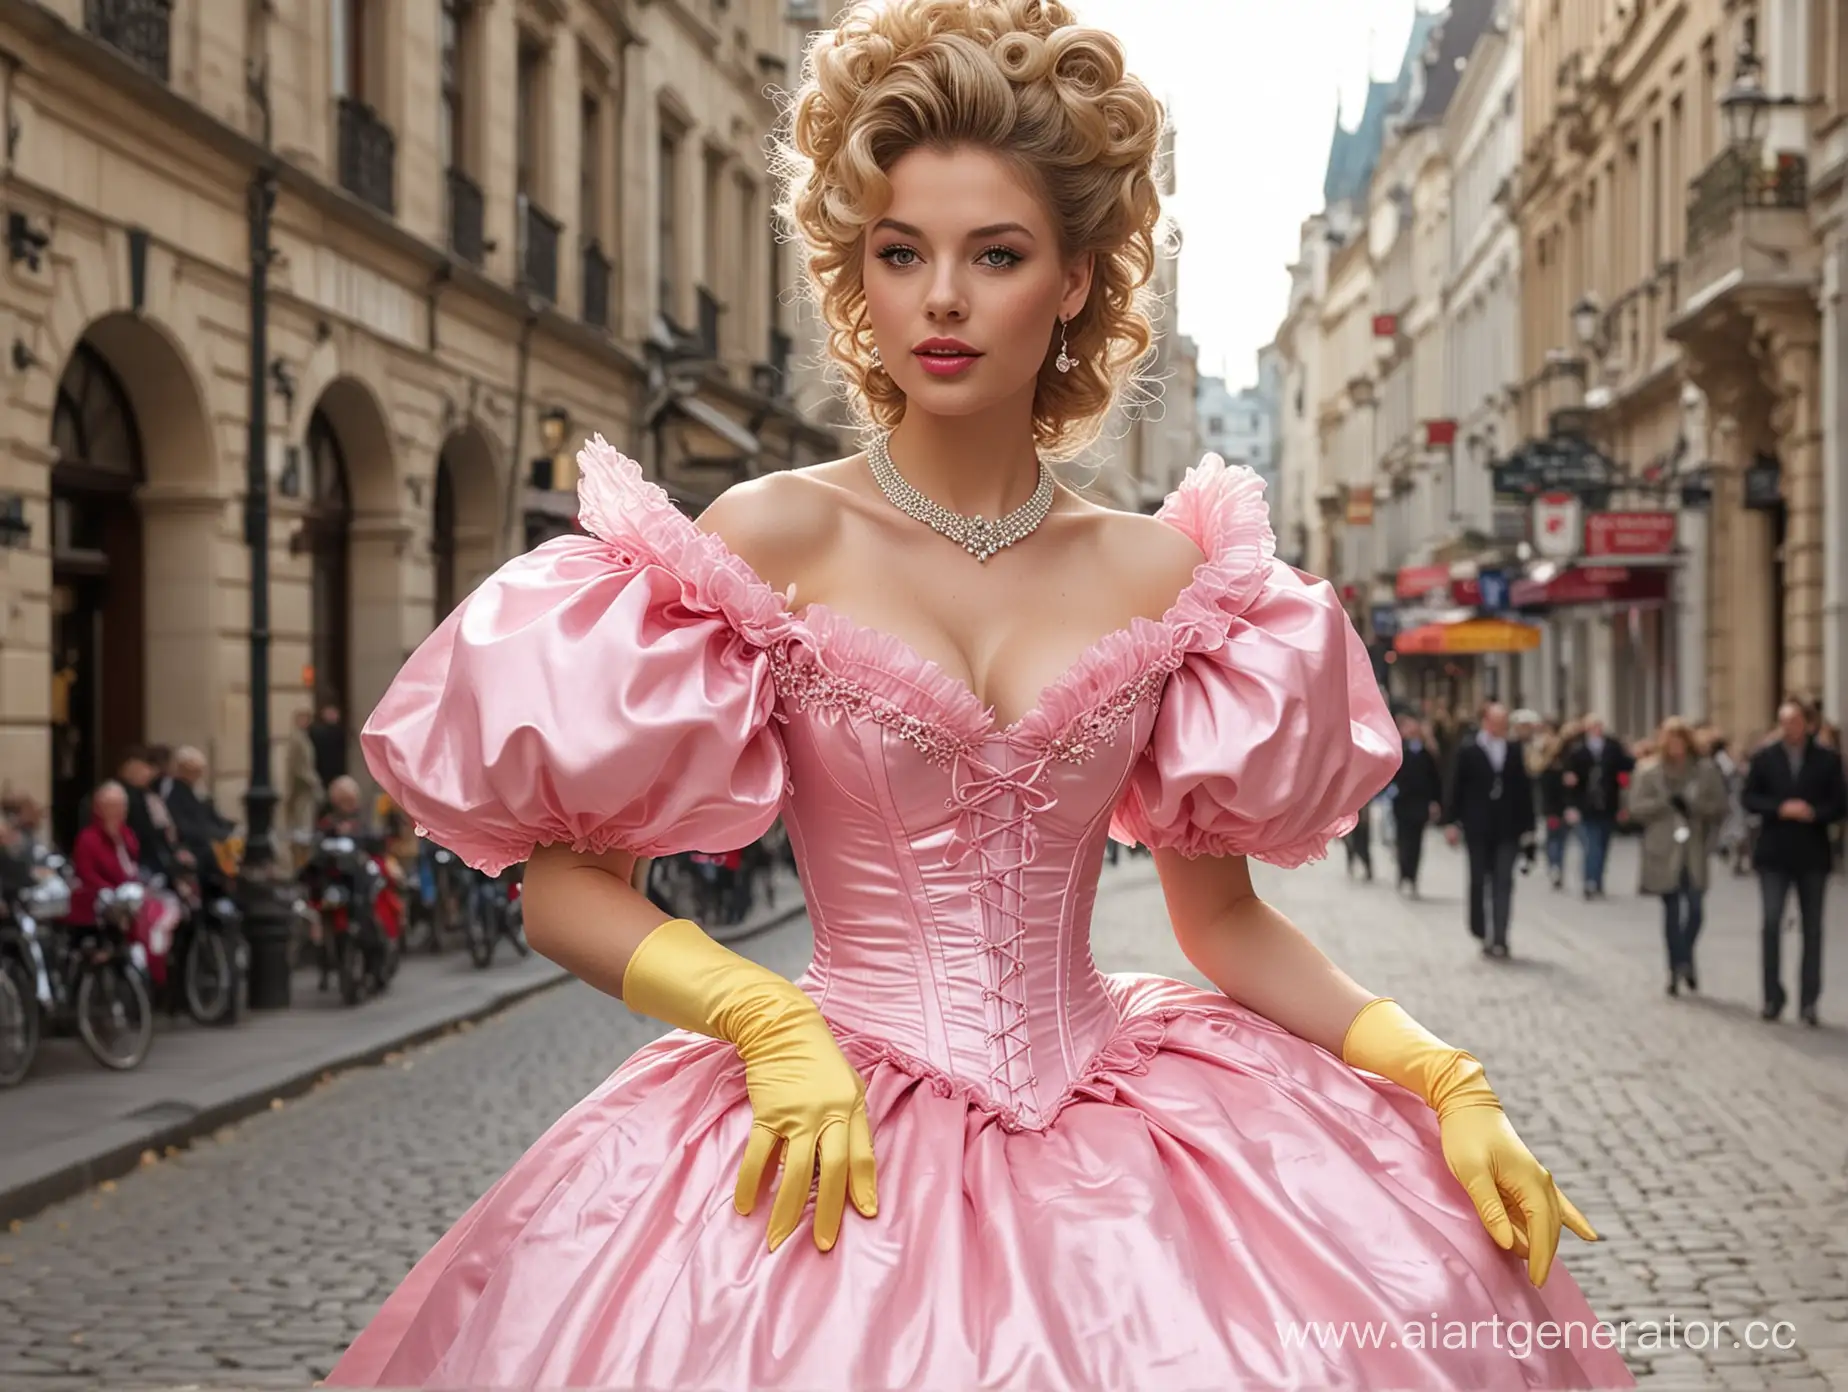 Elegant-Princess-in-Pink-Satin-Dress-with-Steel-Stiff-Corset-Strolling-in-Sunny-City-Center